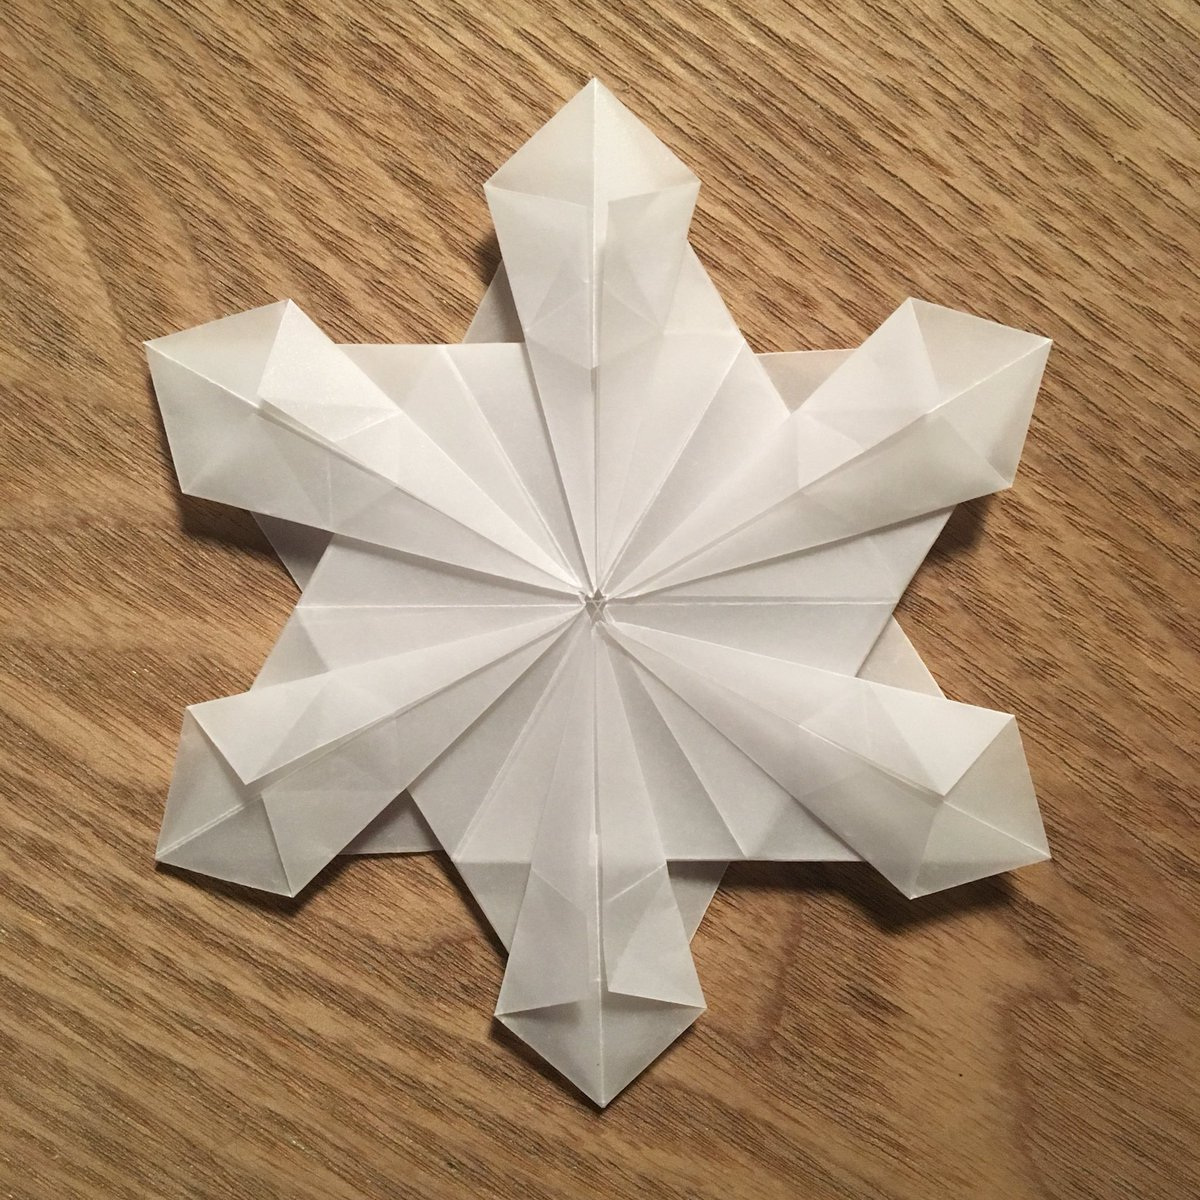 Printer Paper Origami Clarissa Grandi On Twitter You Could Steal Some Paper From The